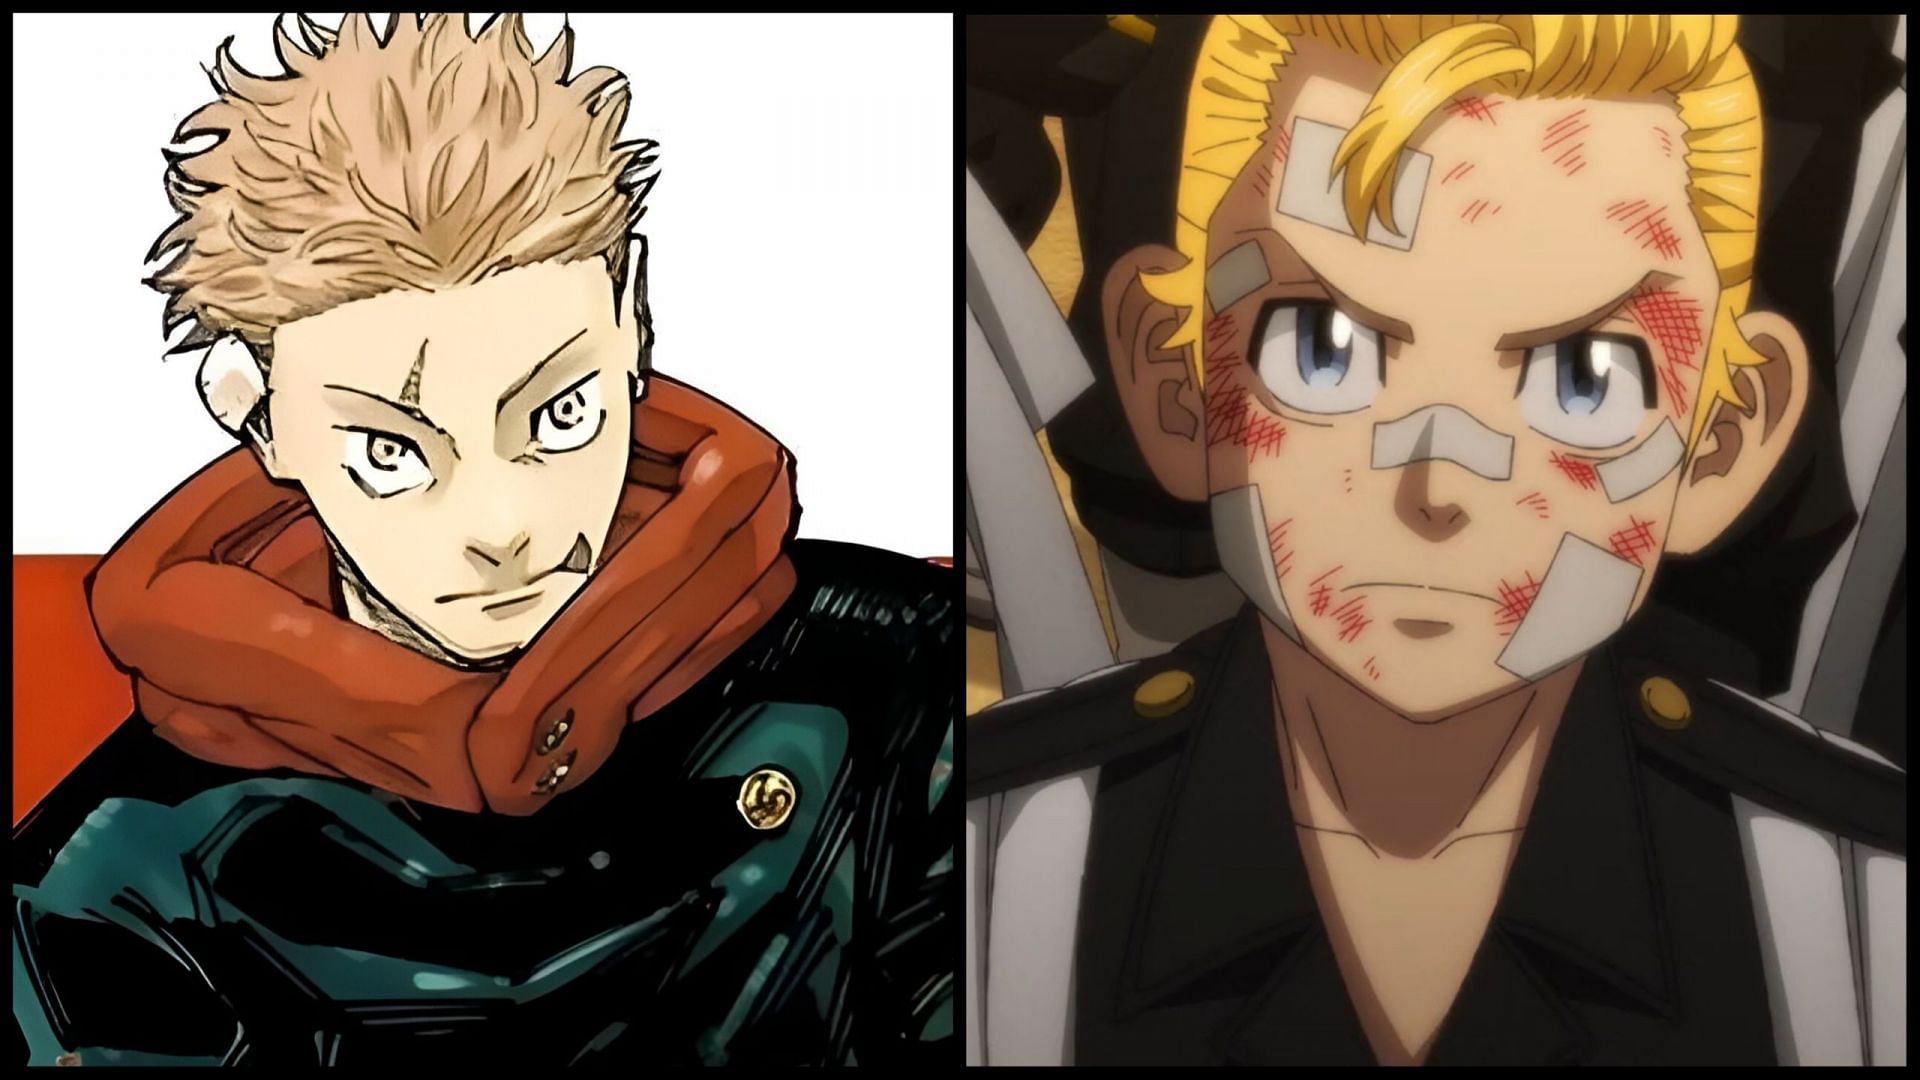 Jujutsu Kaisen can ruin its legacy if Gege makes the same mistake as Tokyo Revengers